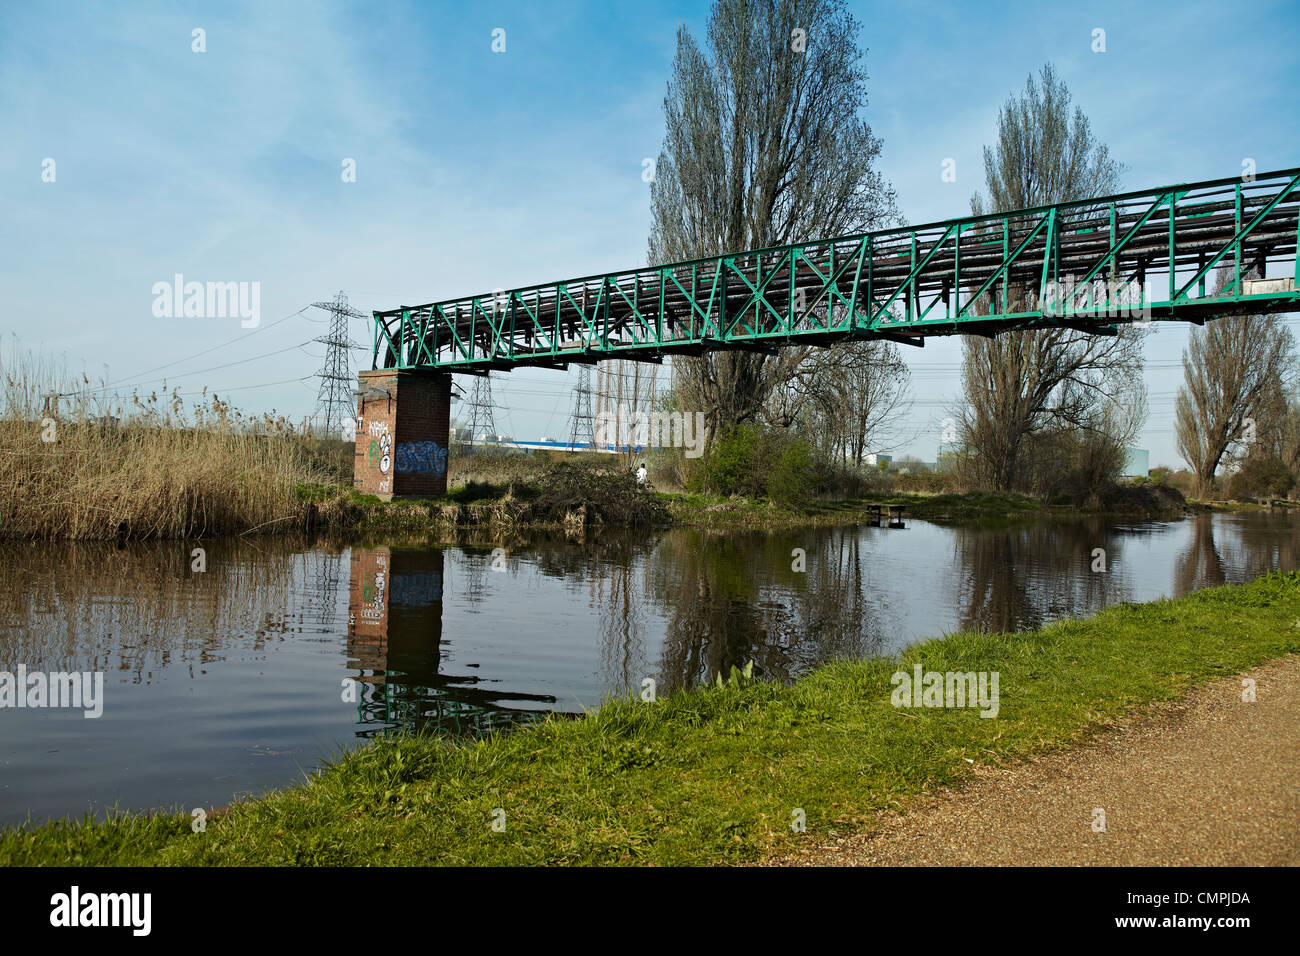 Canal scene with electricity pylons and pipe bridge on a sunny day. Stock Photo